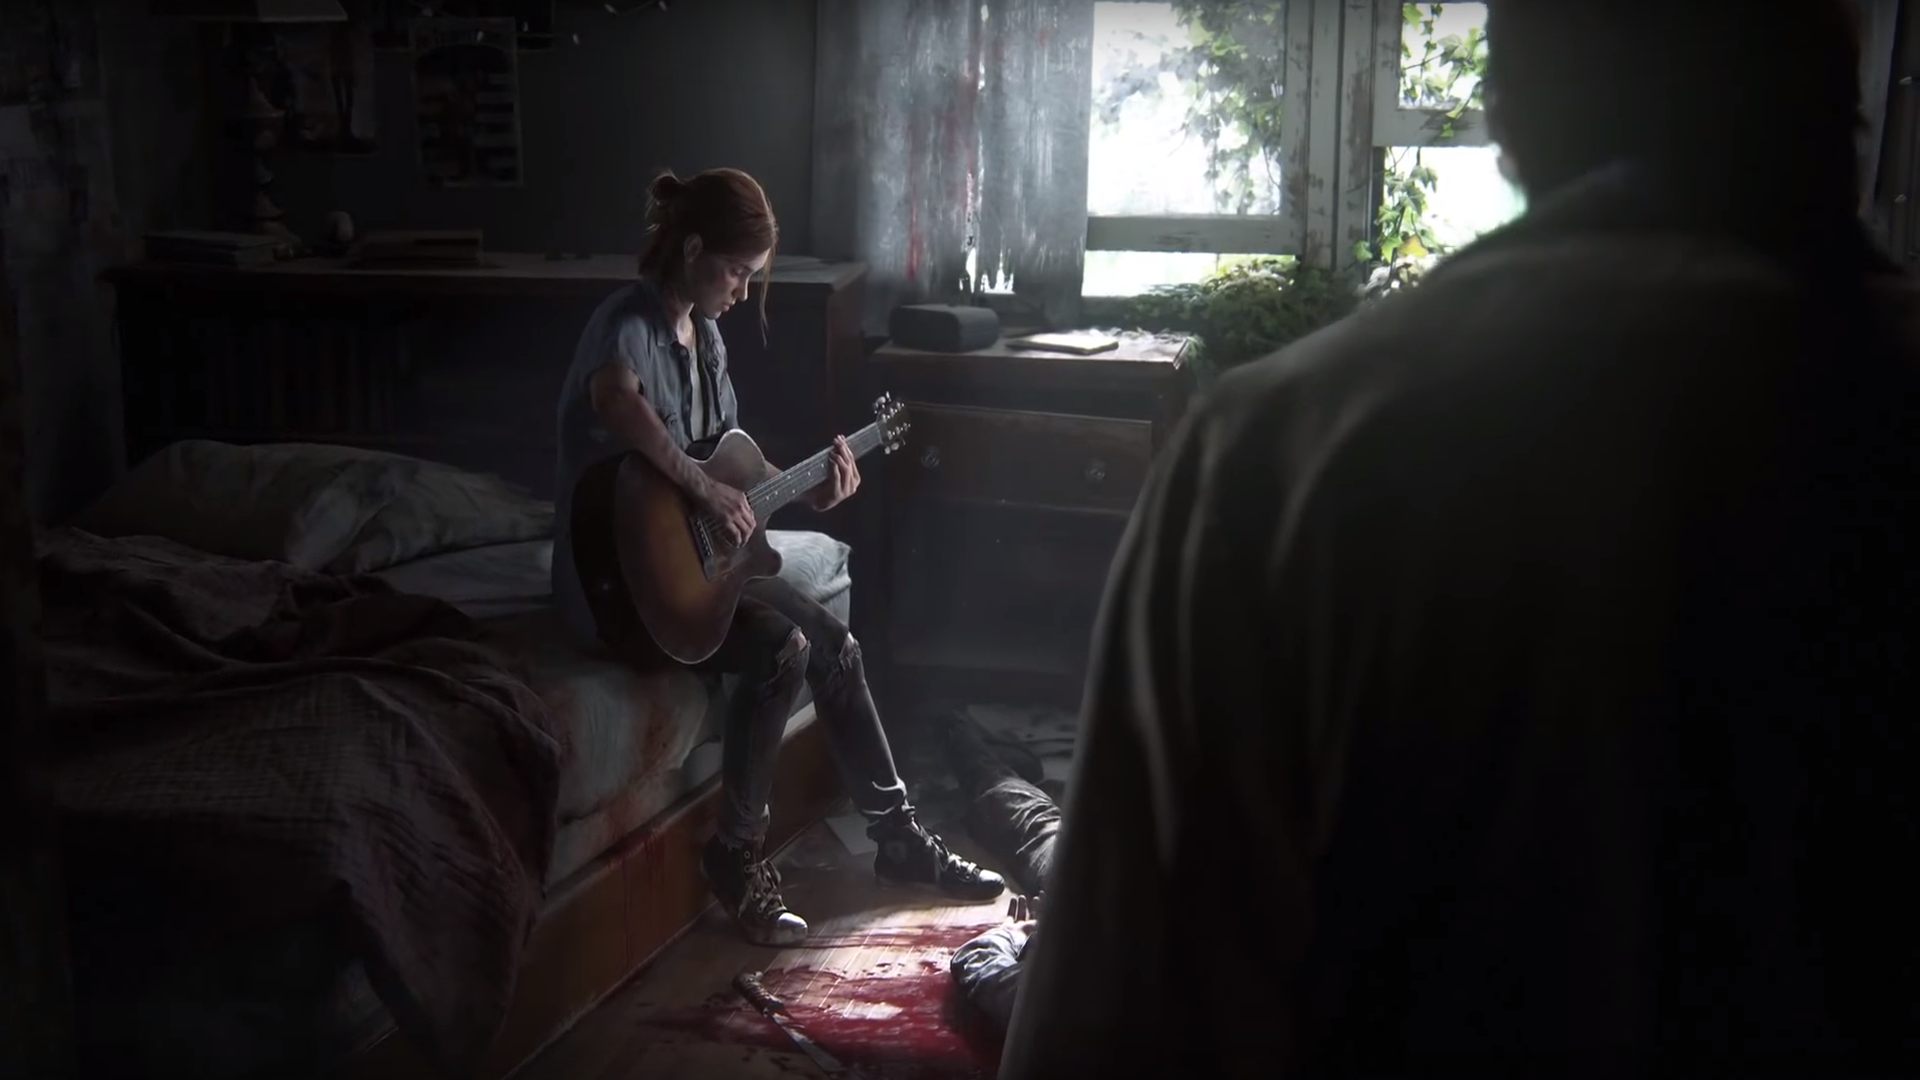 Why The Last Of Us Season 2 Shouldn't Have Ellie As The Main Character